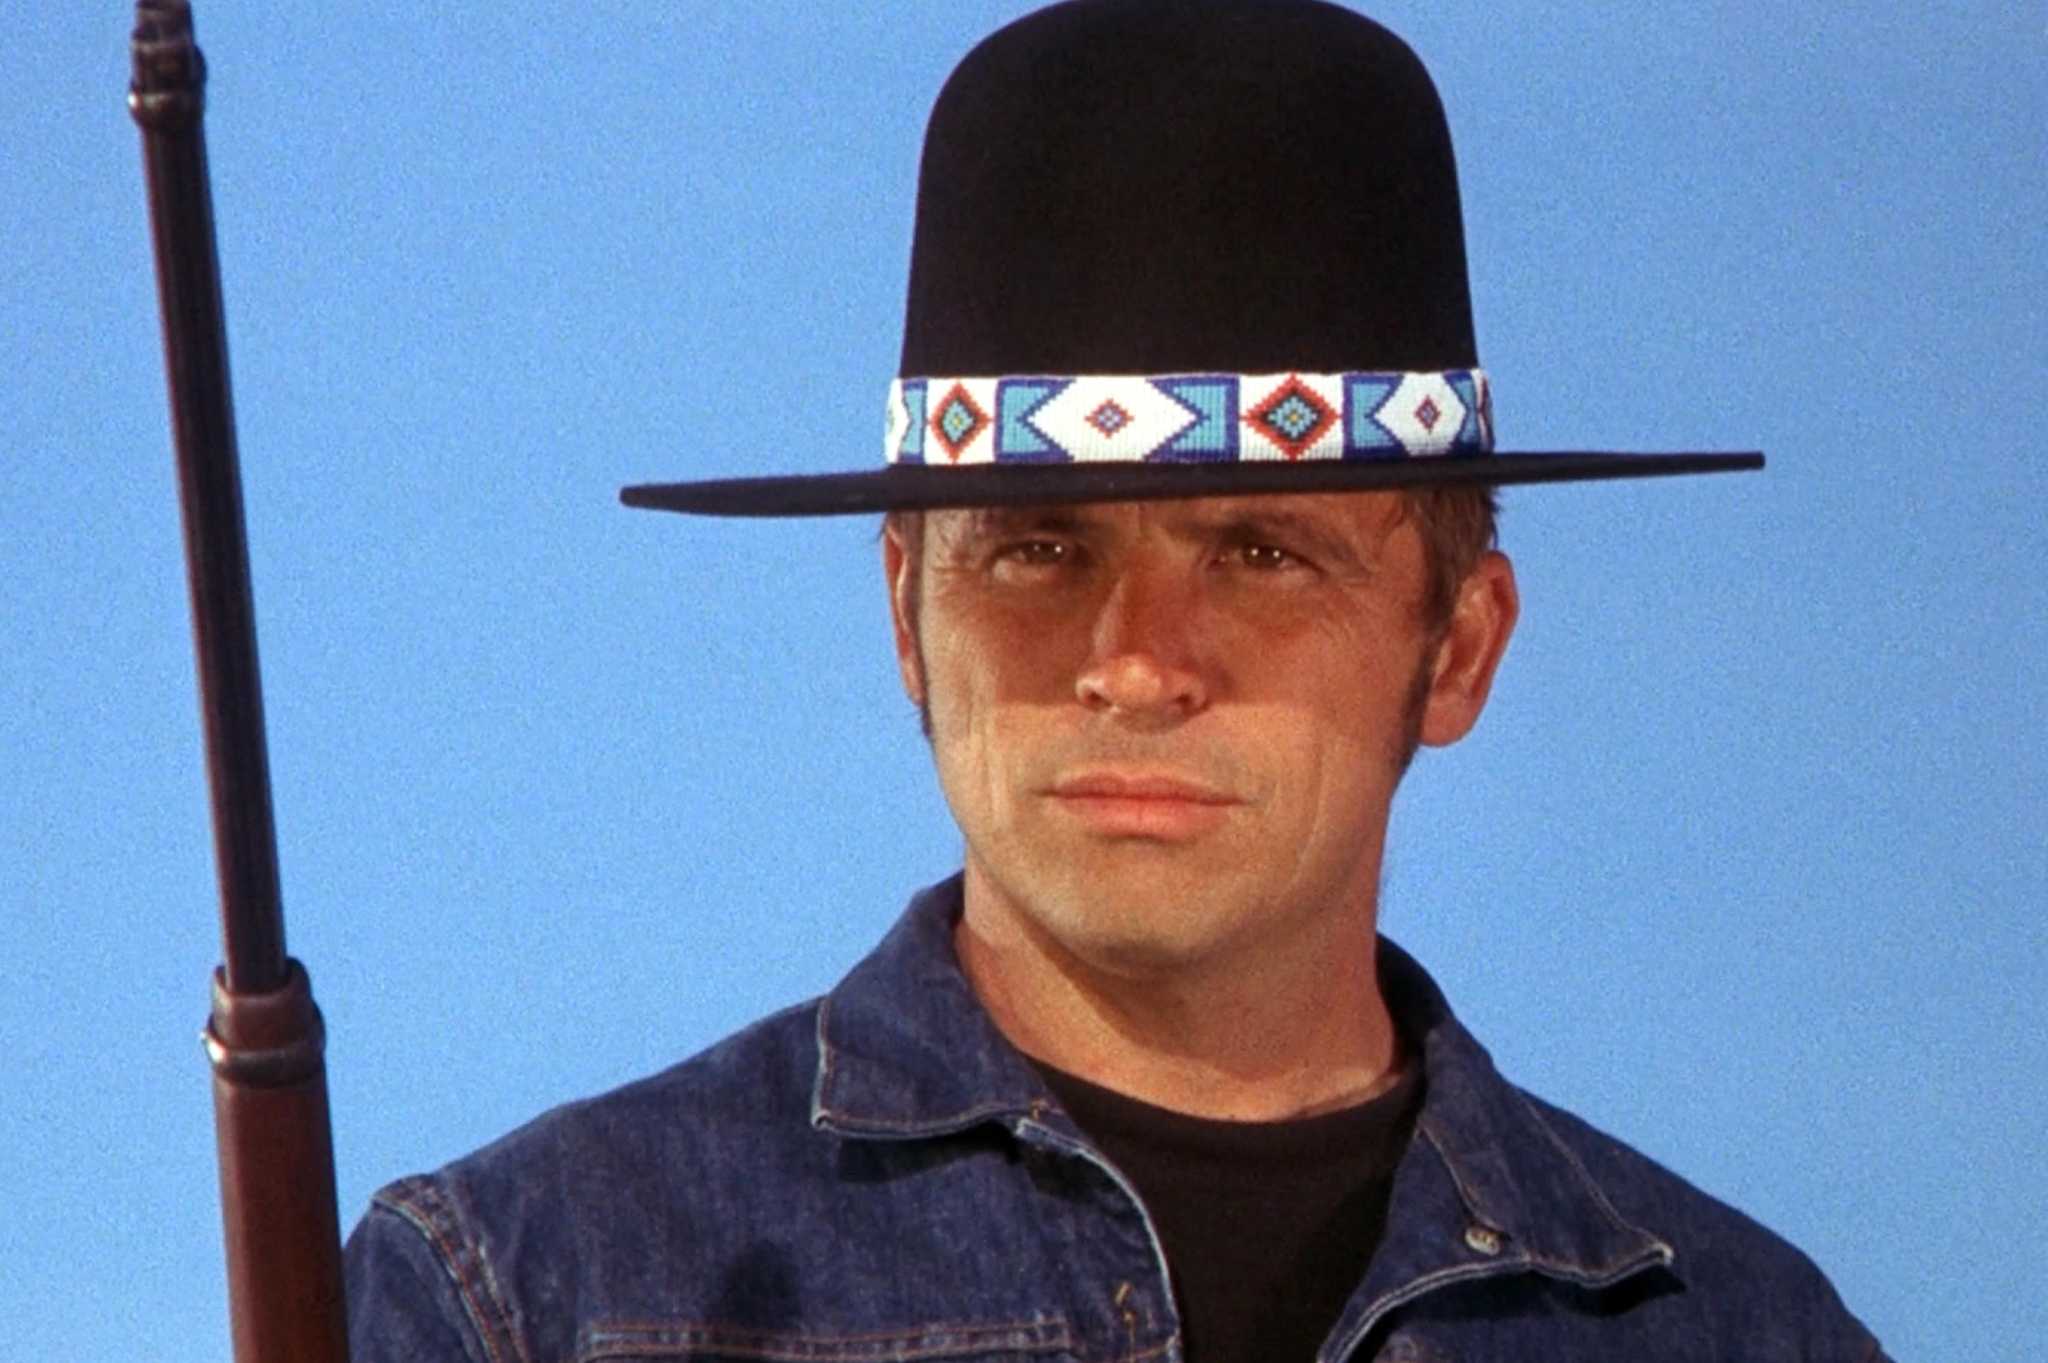 Billy Jack goes berserk again in new collection - SFGate